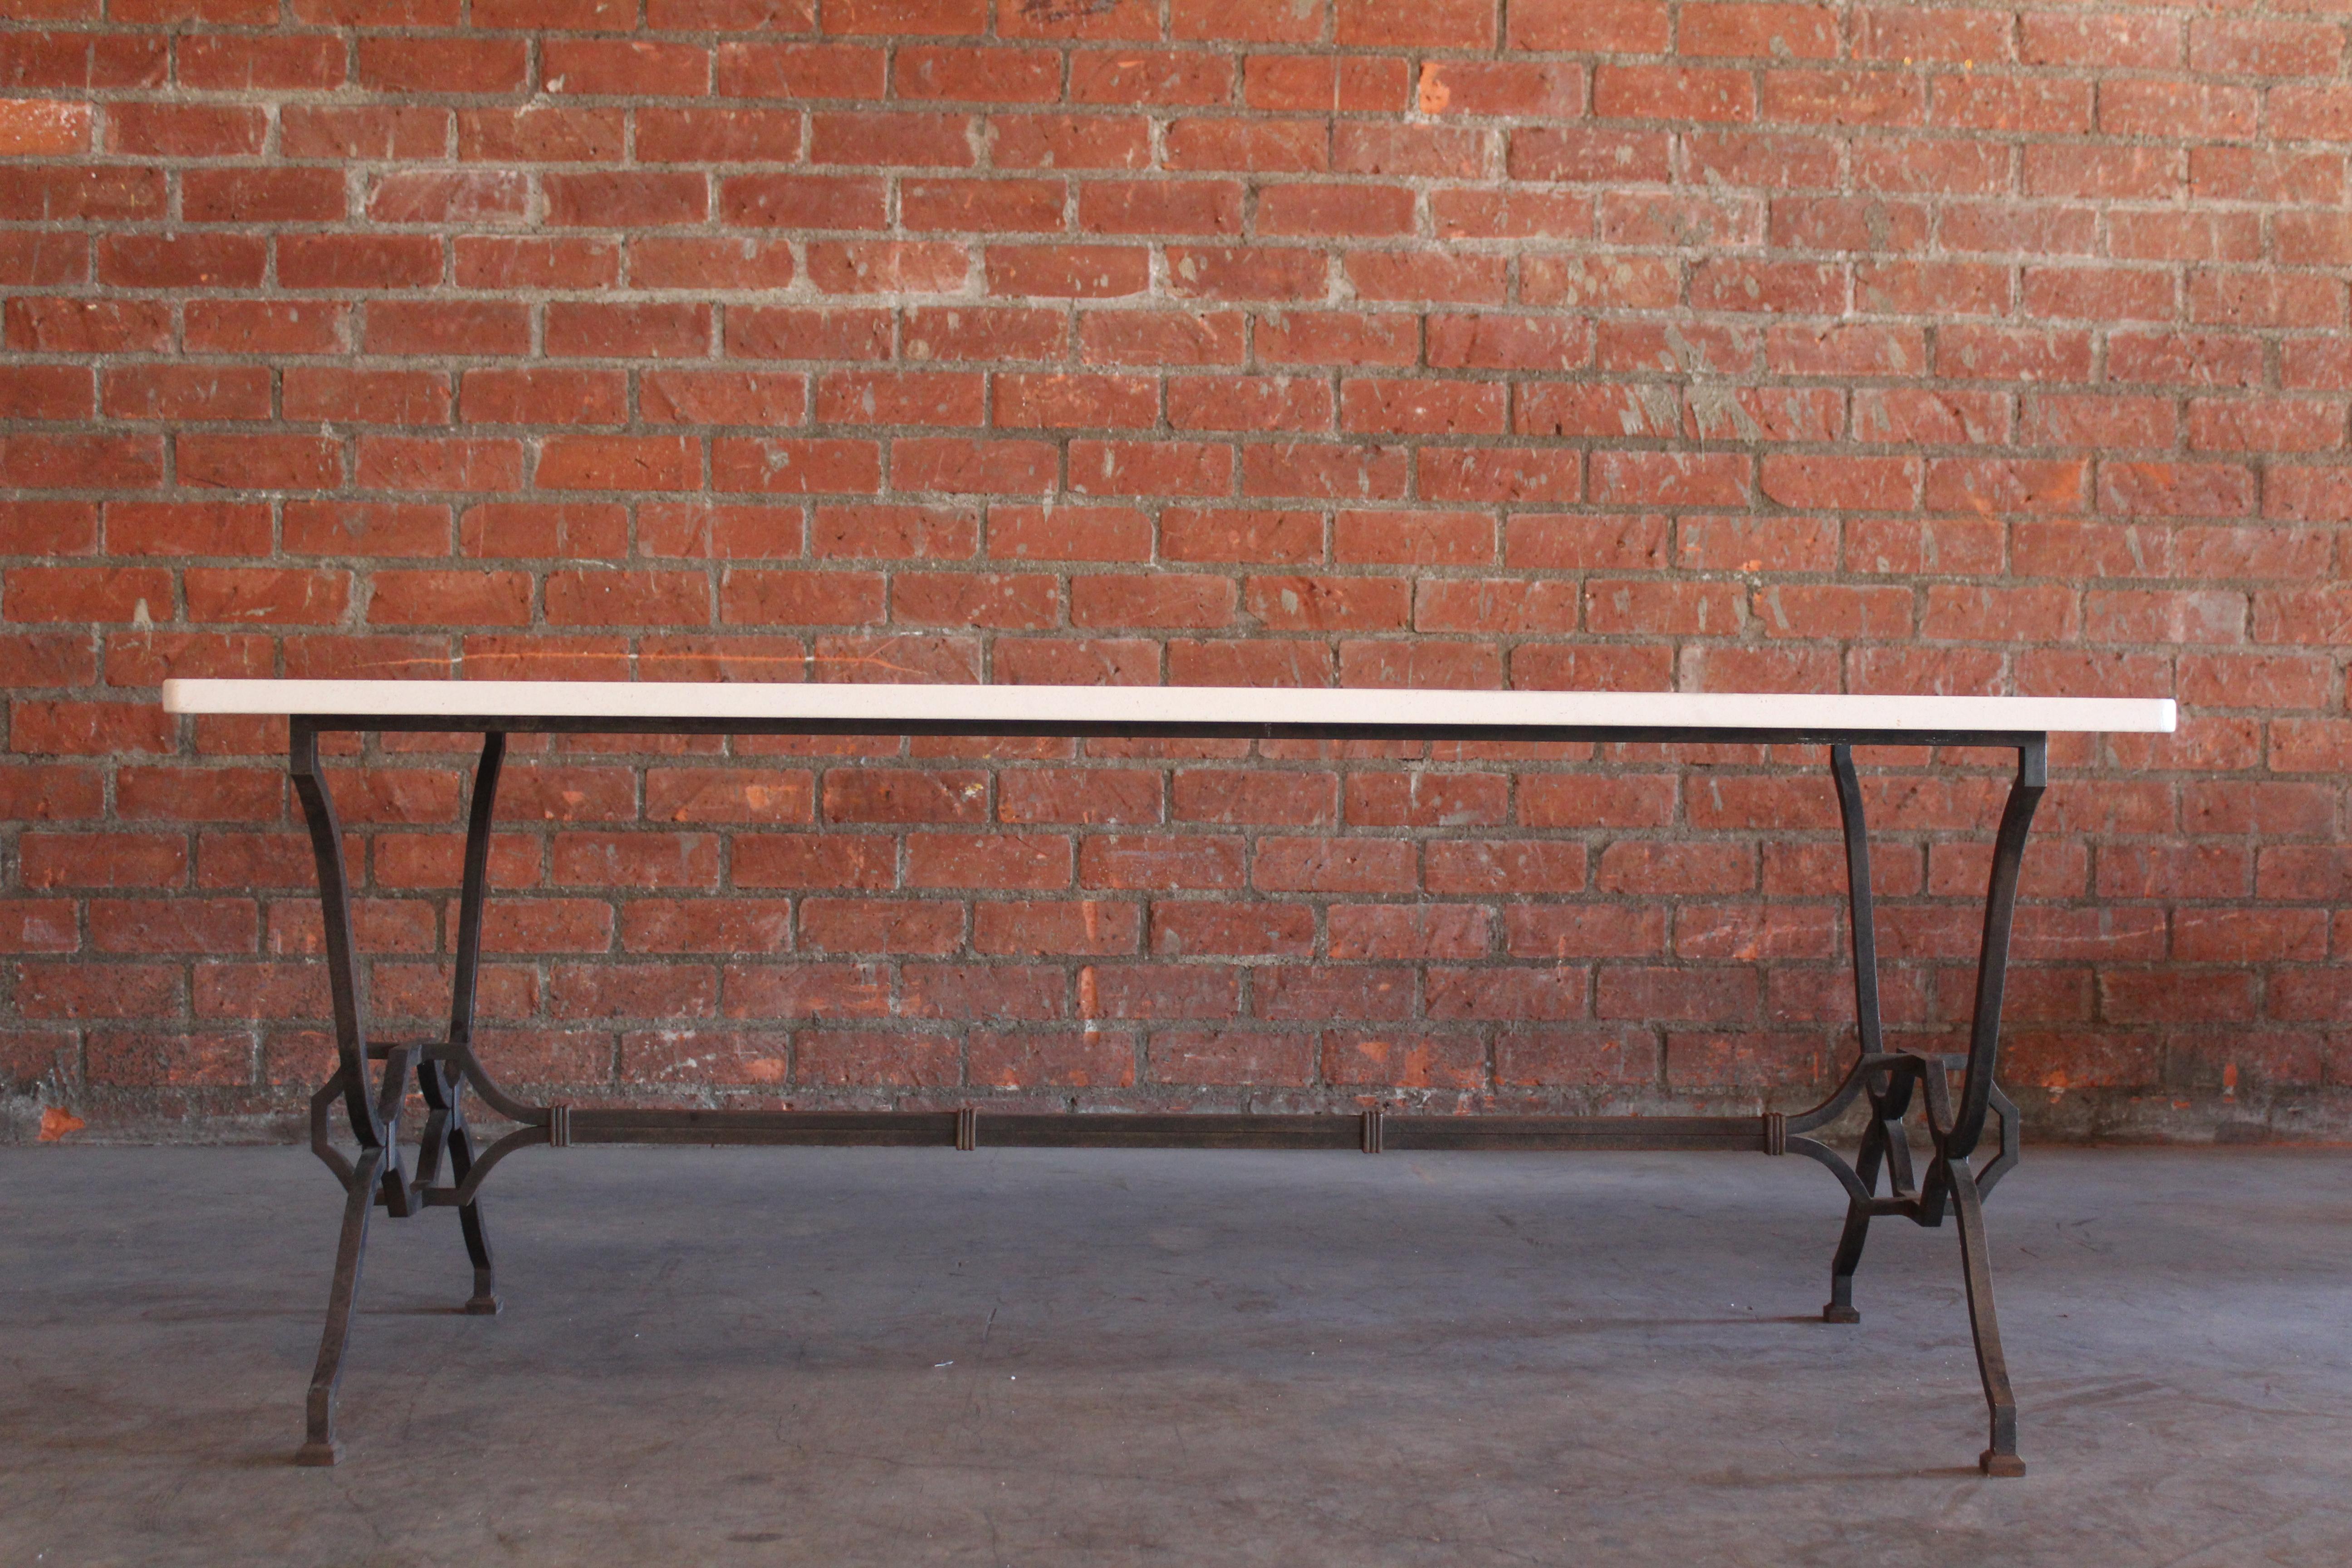 1940s French Wrought Iron and Limestone Table by Colette Gueden for René Prou For Sale 4